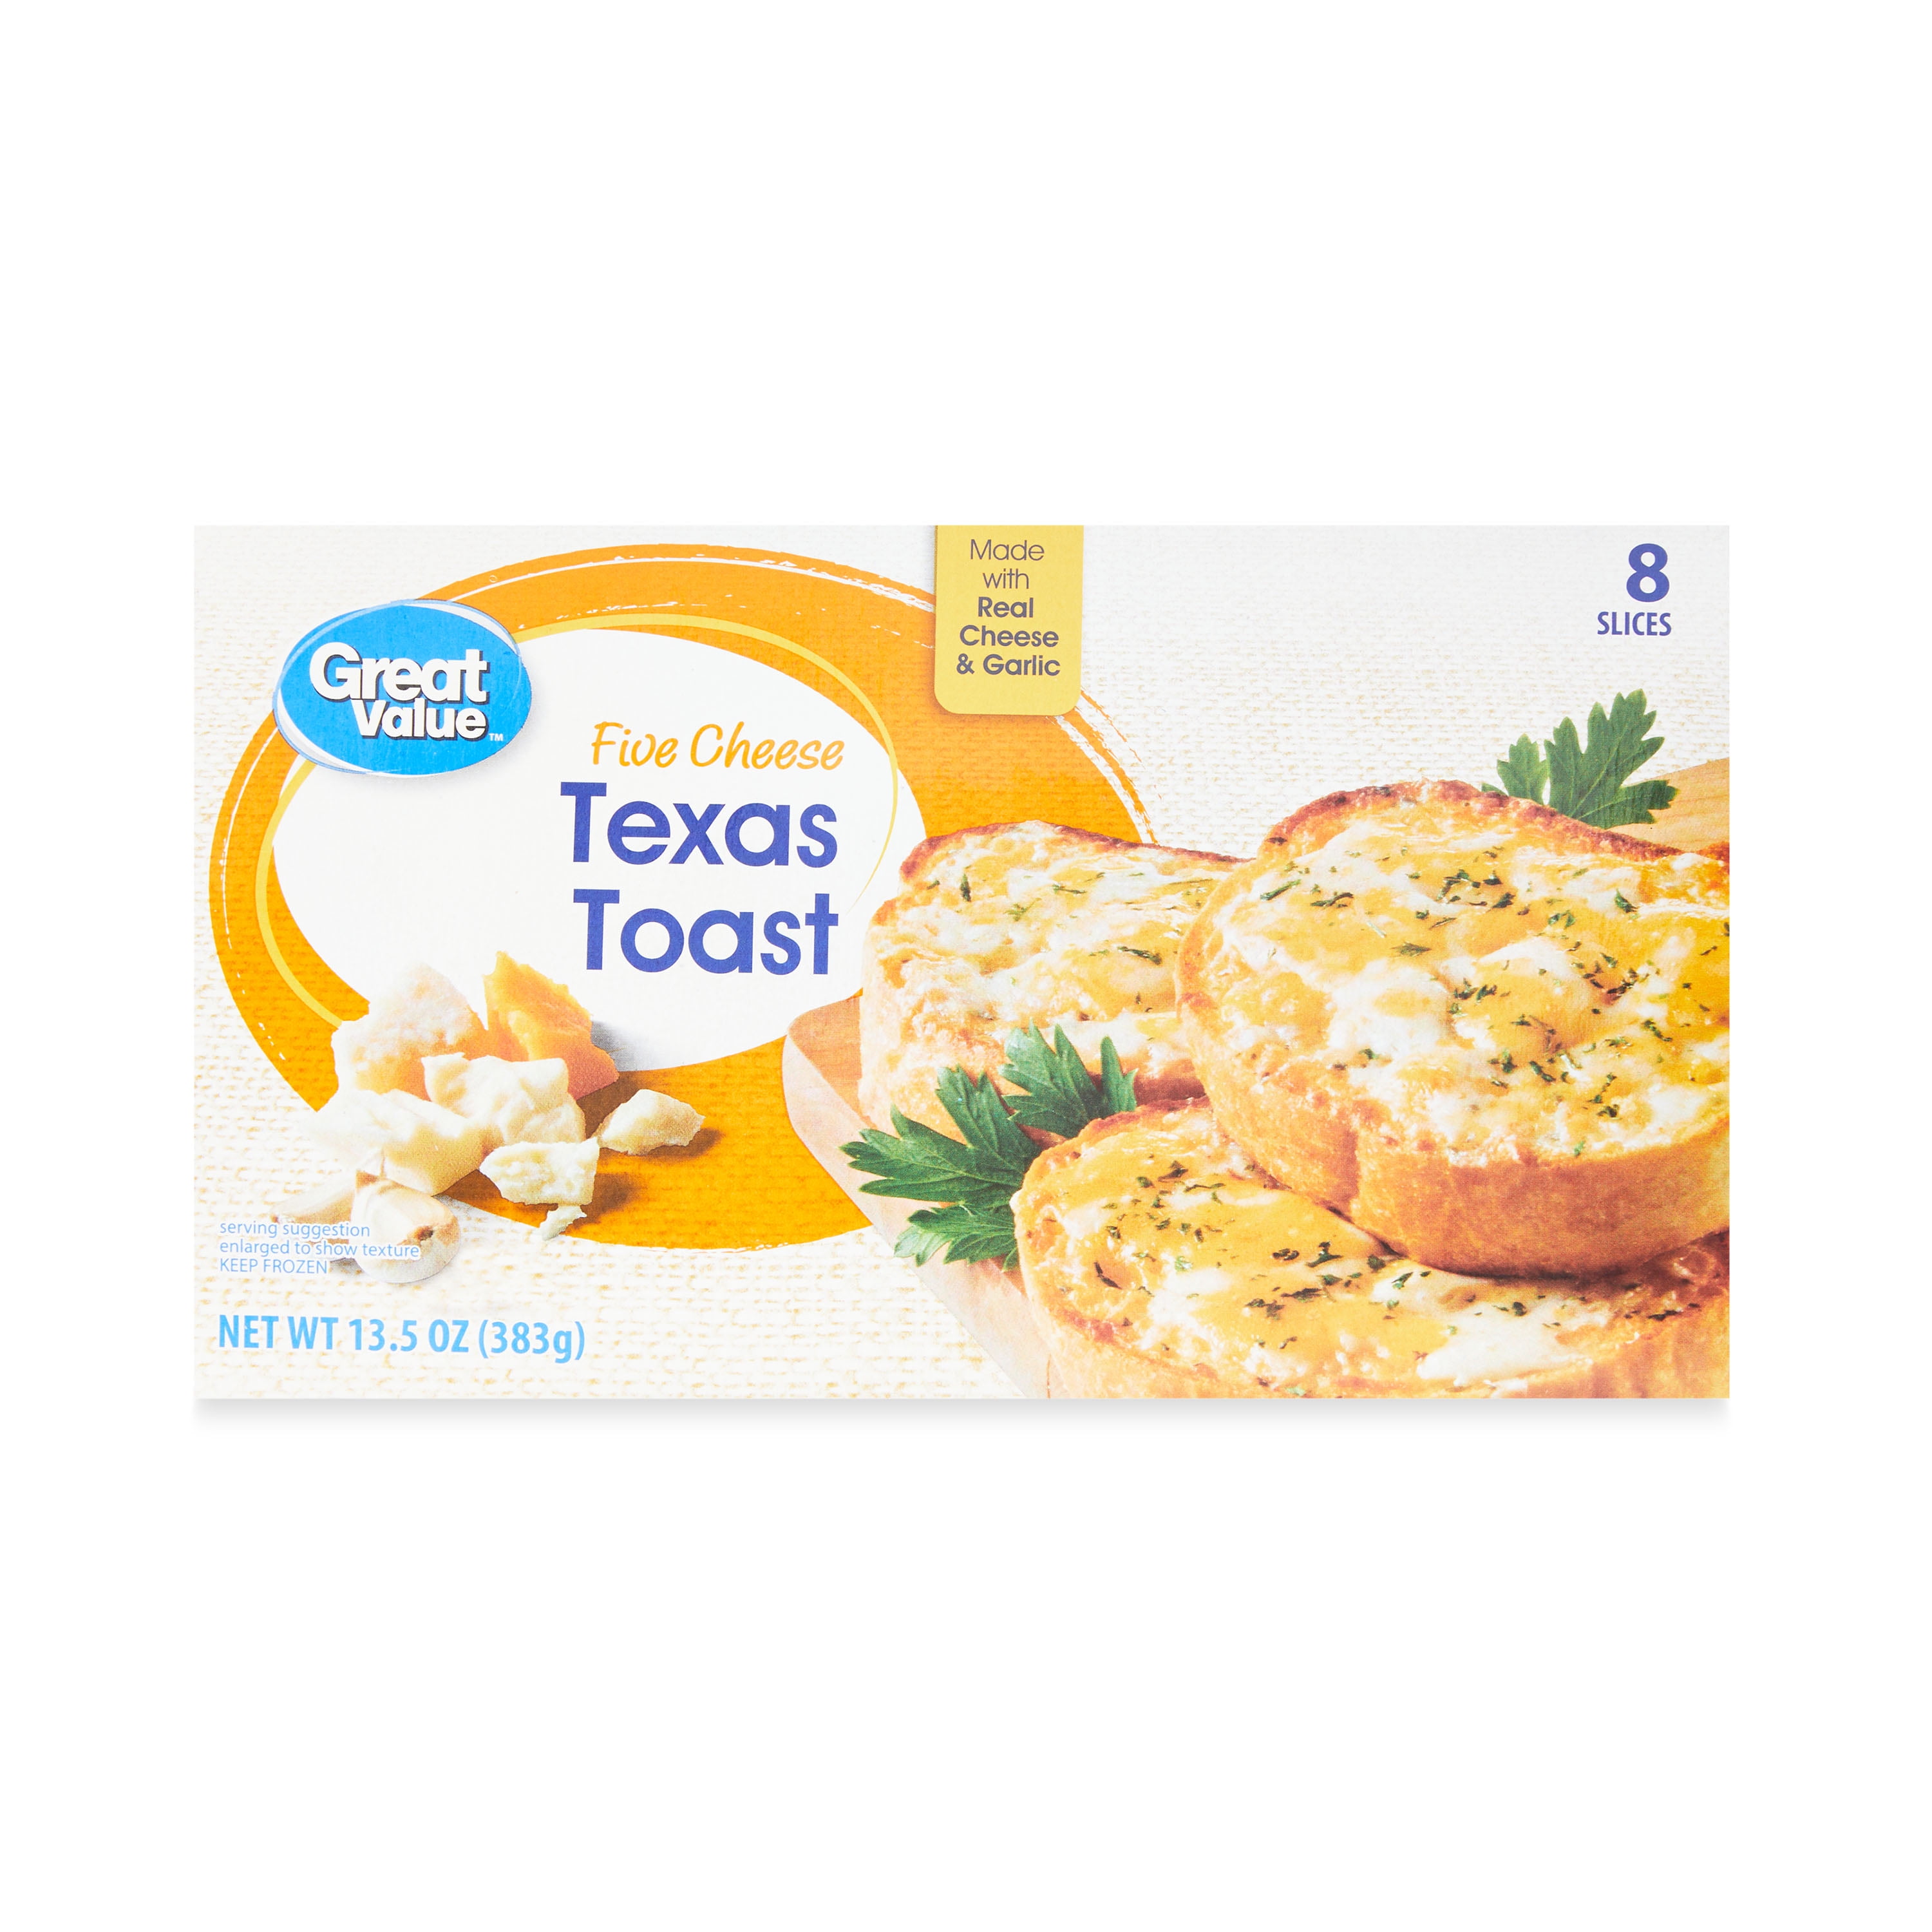 Great Value Five Cheese Texas Toast, 13.5 oz, 8 Count